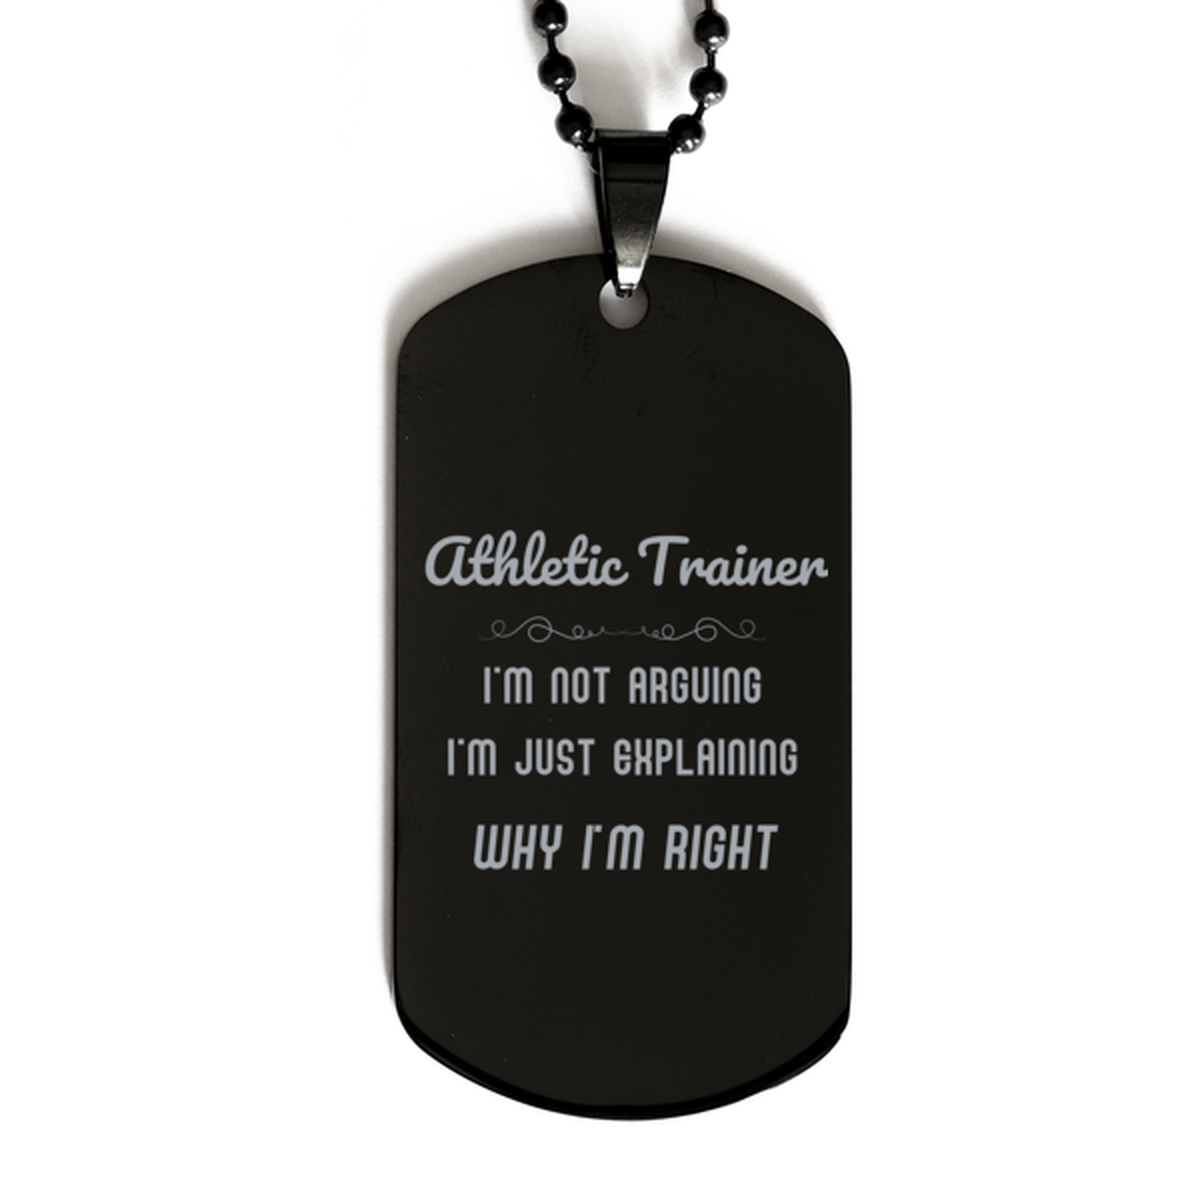 Athletic Trainer I'm not Arguing. I'm Just Explaining Why I'm RIGHT Black Dog Tag, Funny Saying Quote Athletic Trainer Gifts For Athletic Trainer Graduation Birthday Christmas Gifts for Men Women Coworker